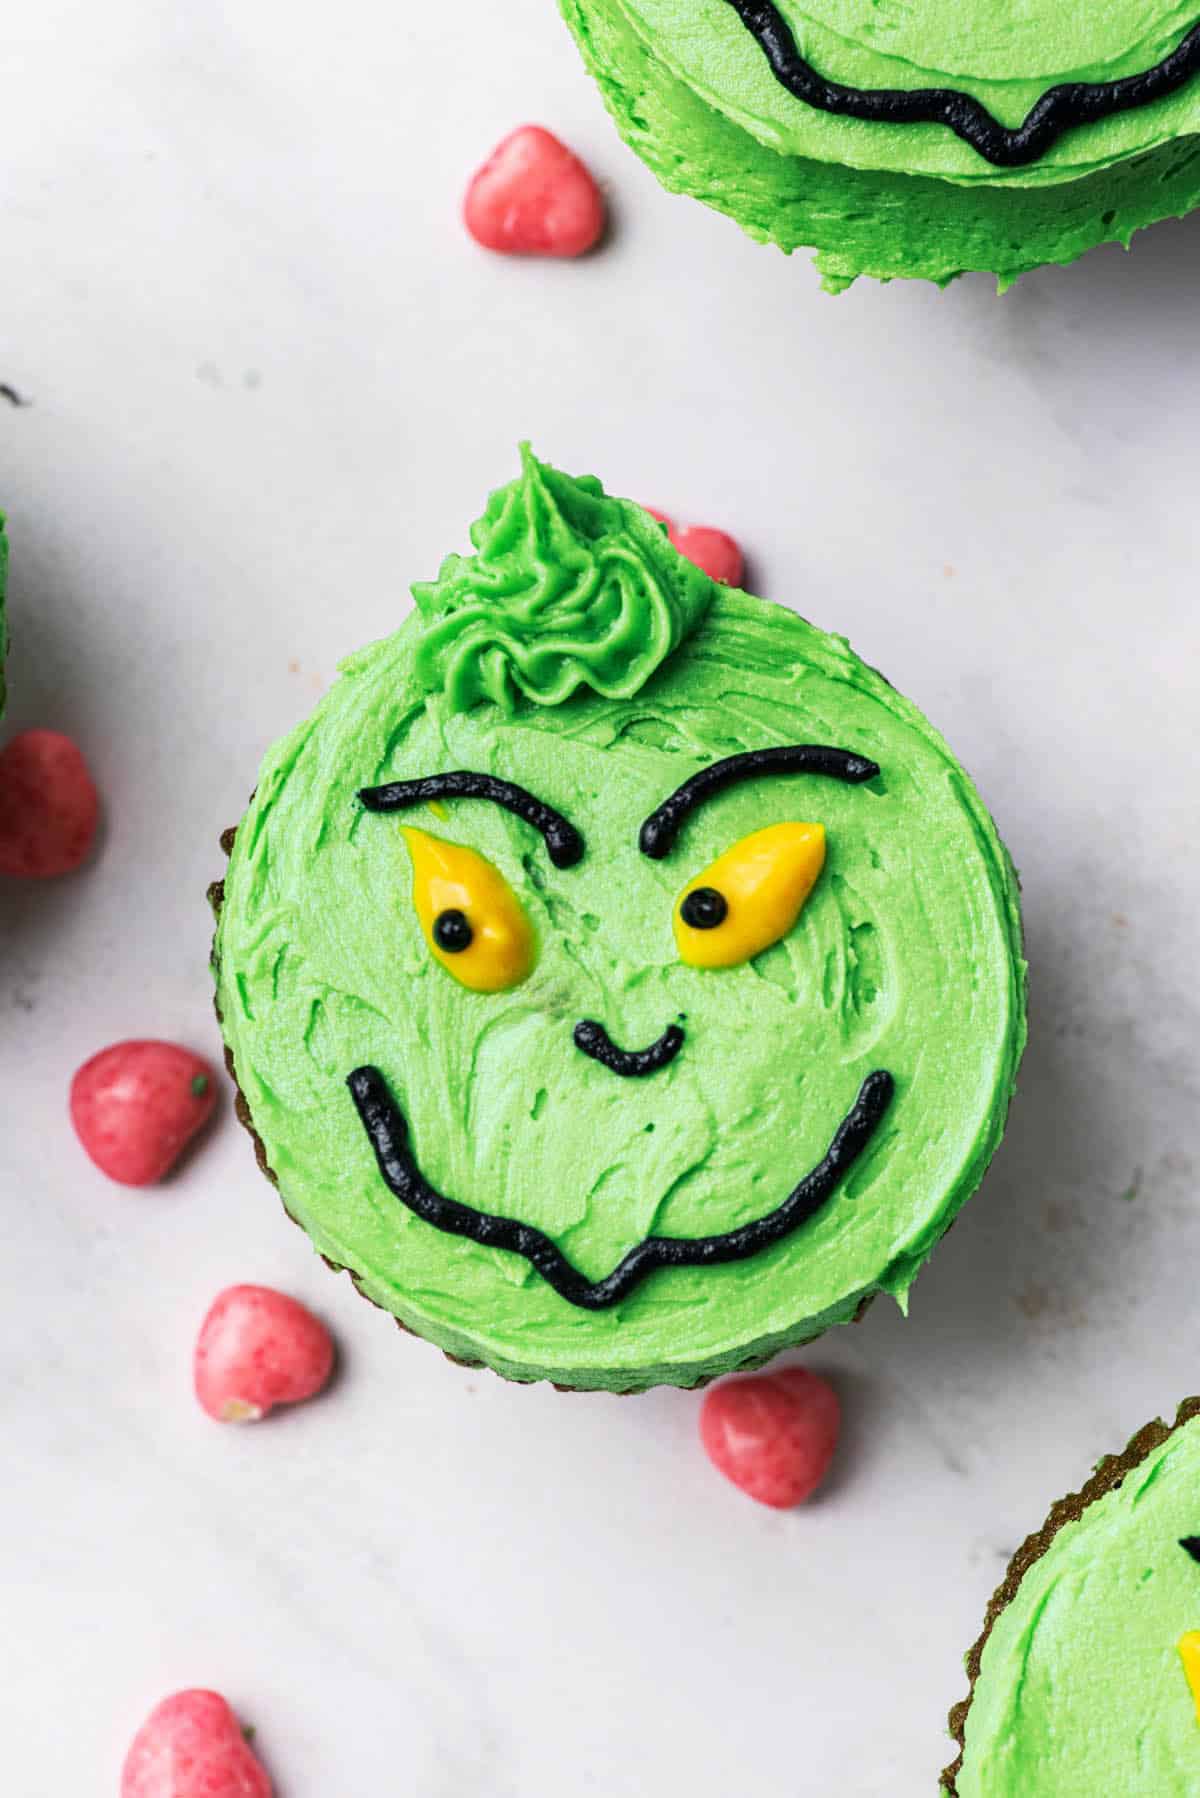 A shifty-looking grinch face made from buttercream on a cupcake base.